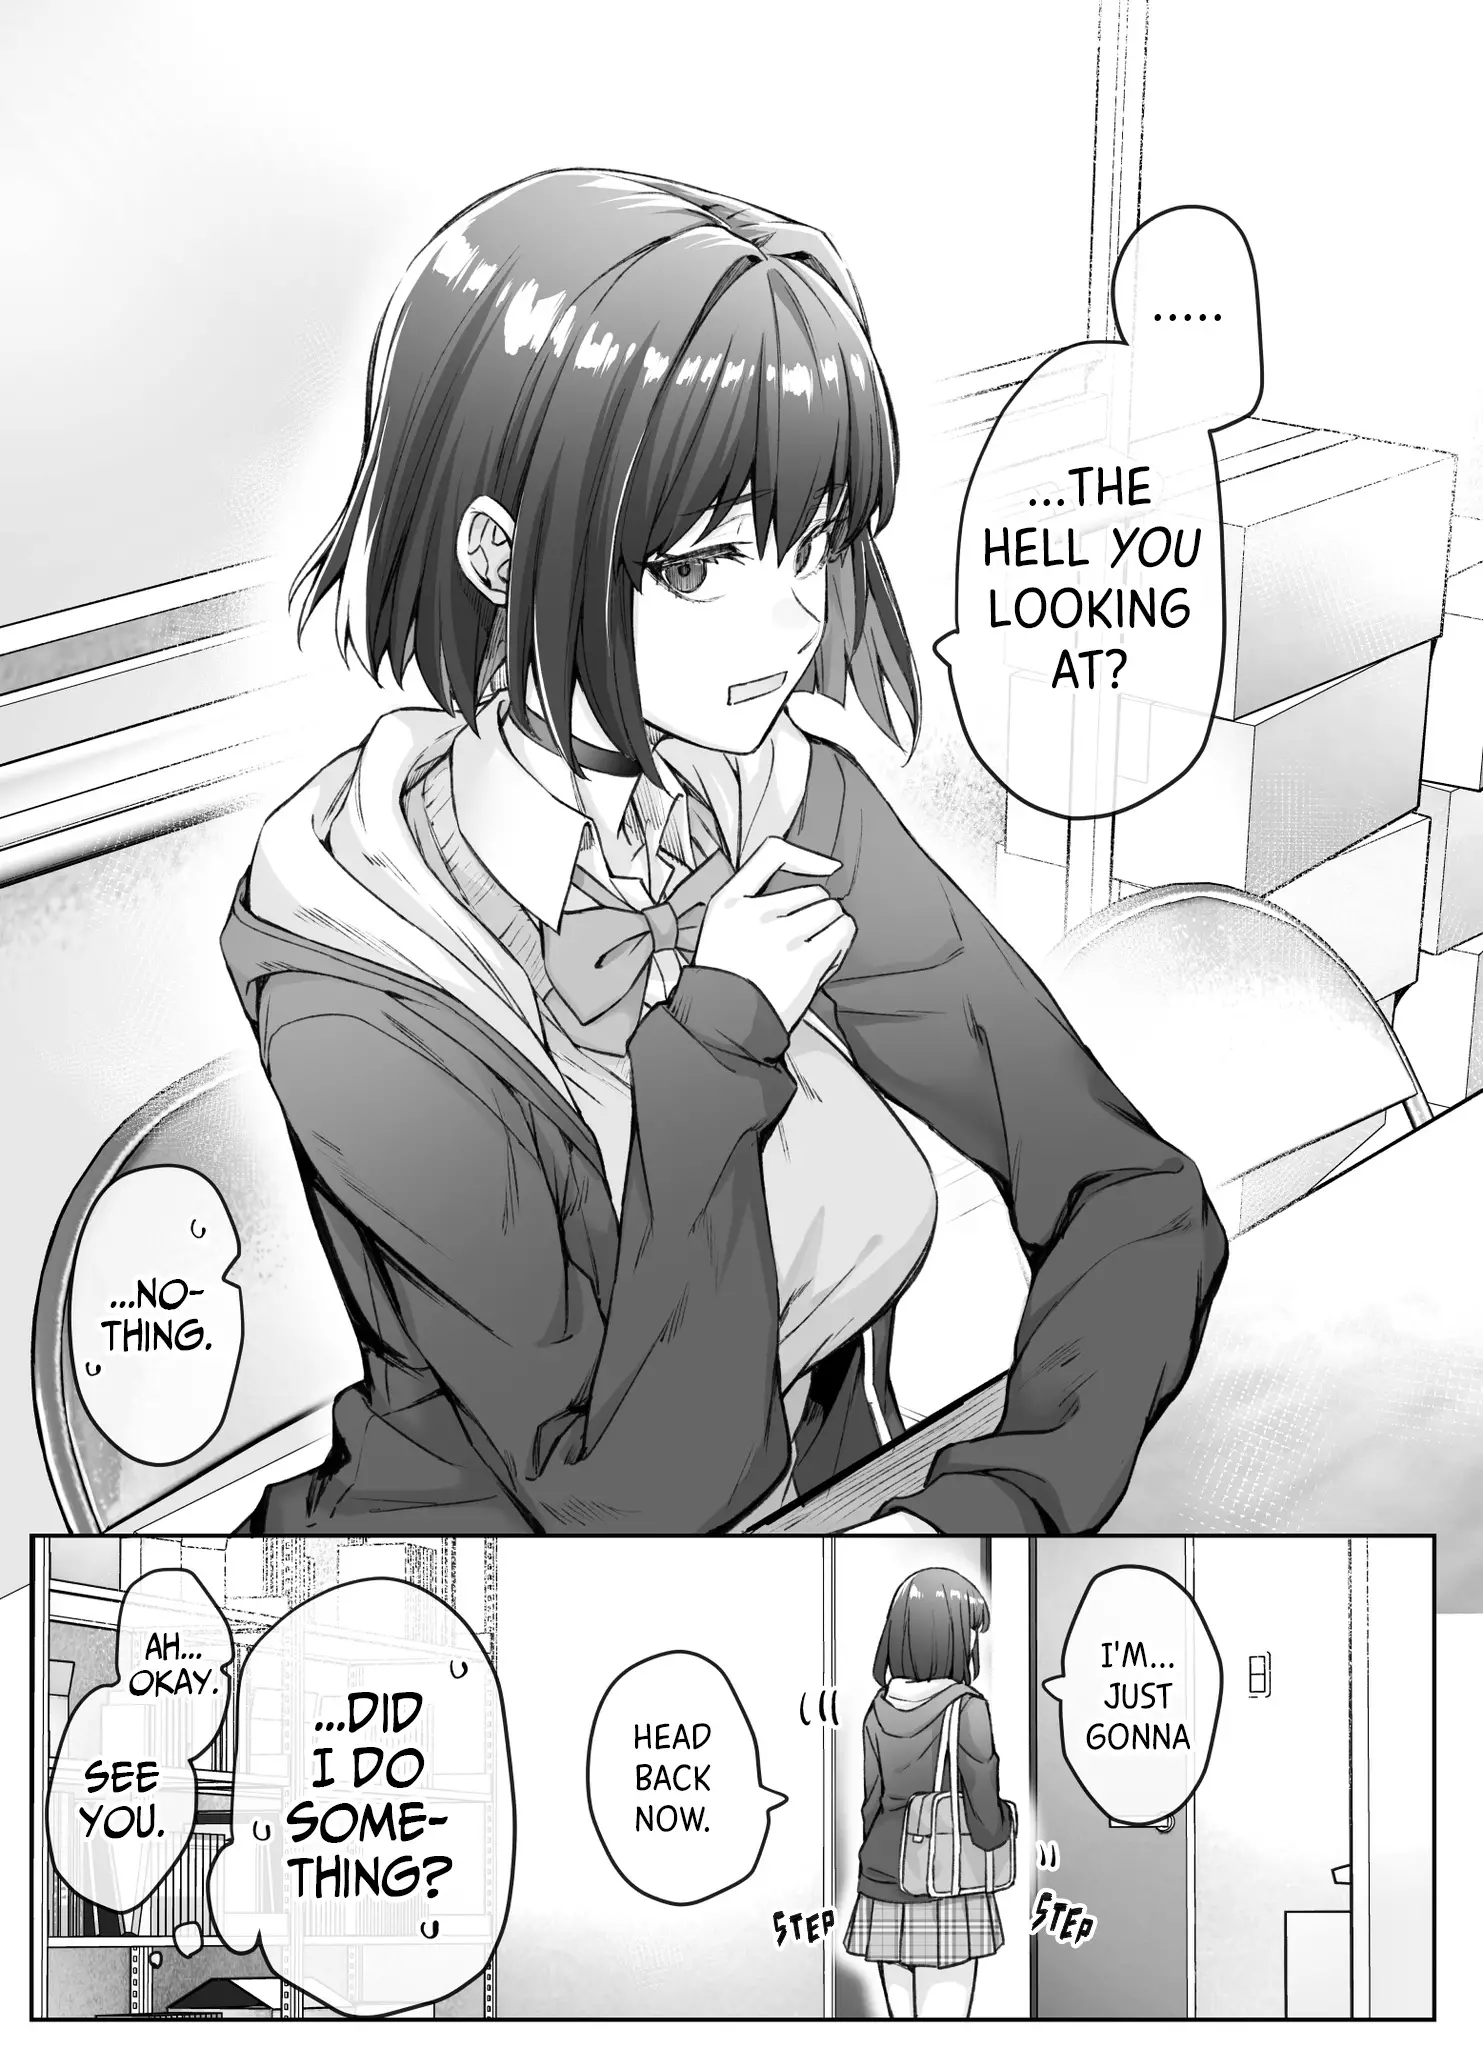 The Tsuntsuntsuntsuntsuntsun Tsuntsuntsuntsuntsundere Girl Getting Less And Less Tsun Day By Day - 28 page 1-4f26c8b9